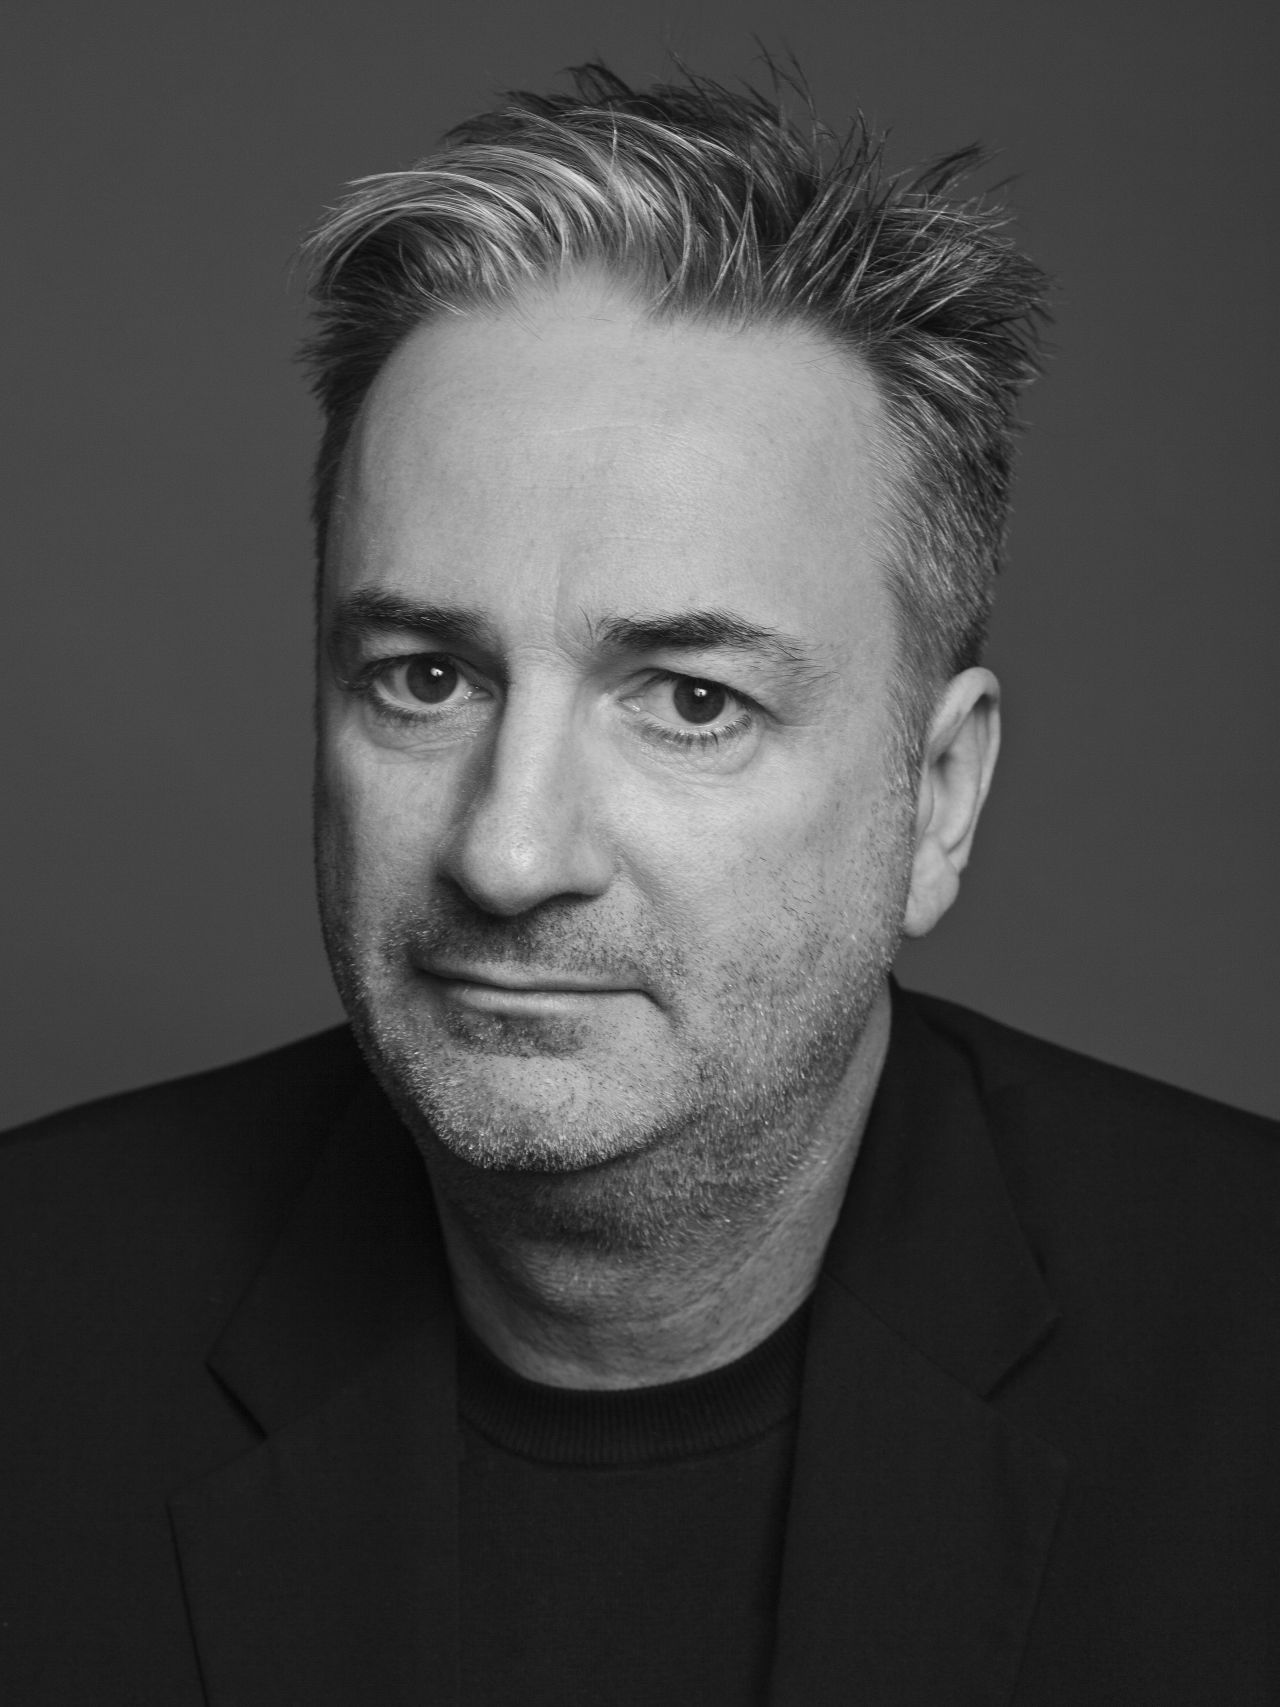 Paul Morley, author of "The Age of Bowie"